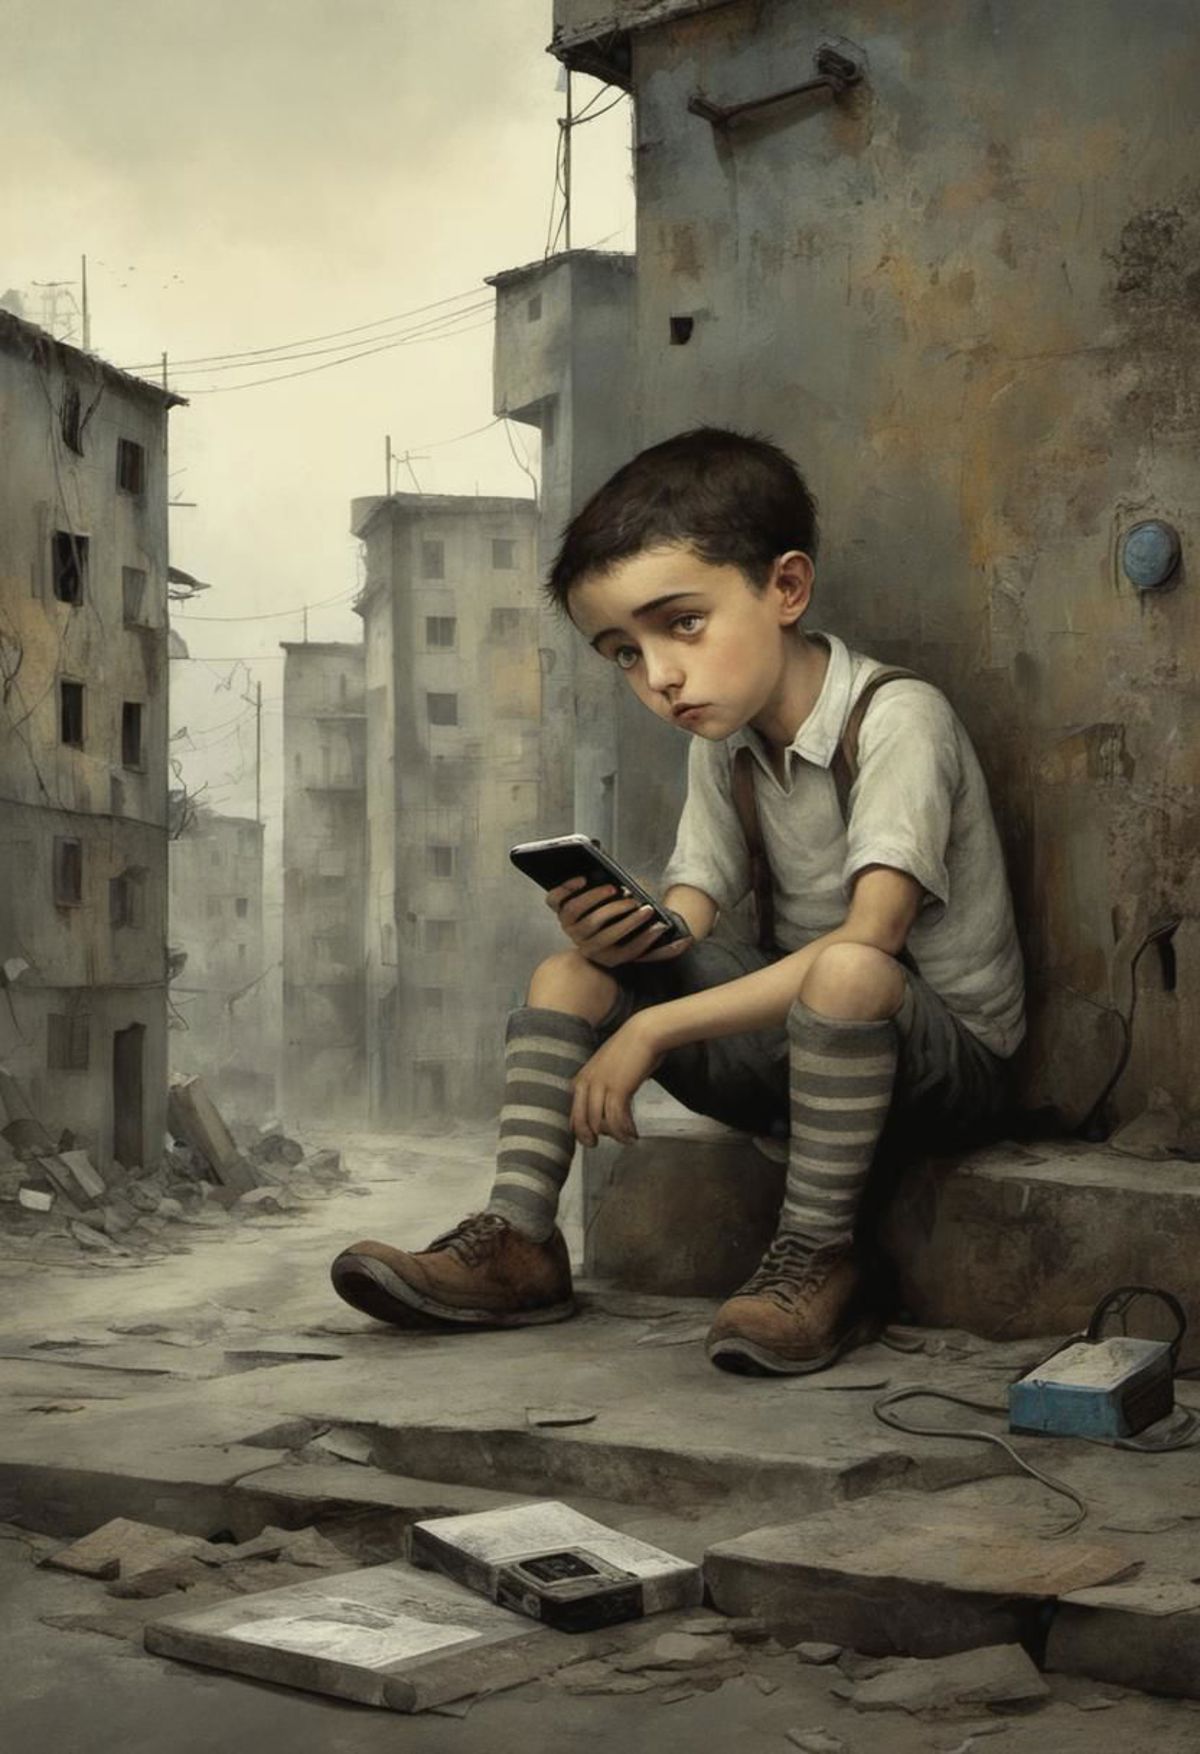 Gabriel Pacheco Style image by beg0n